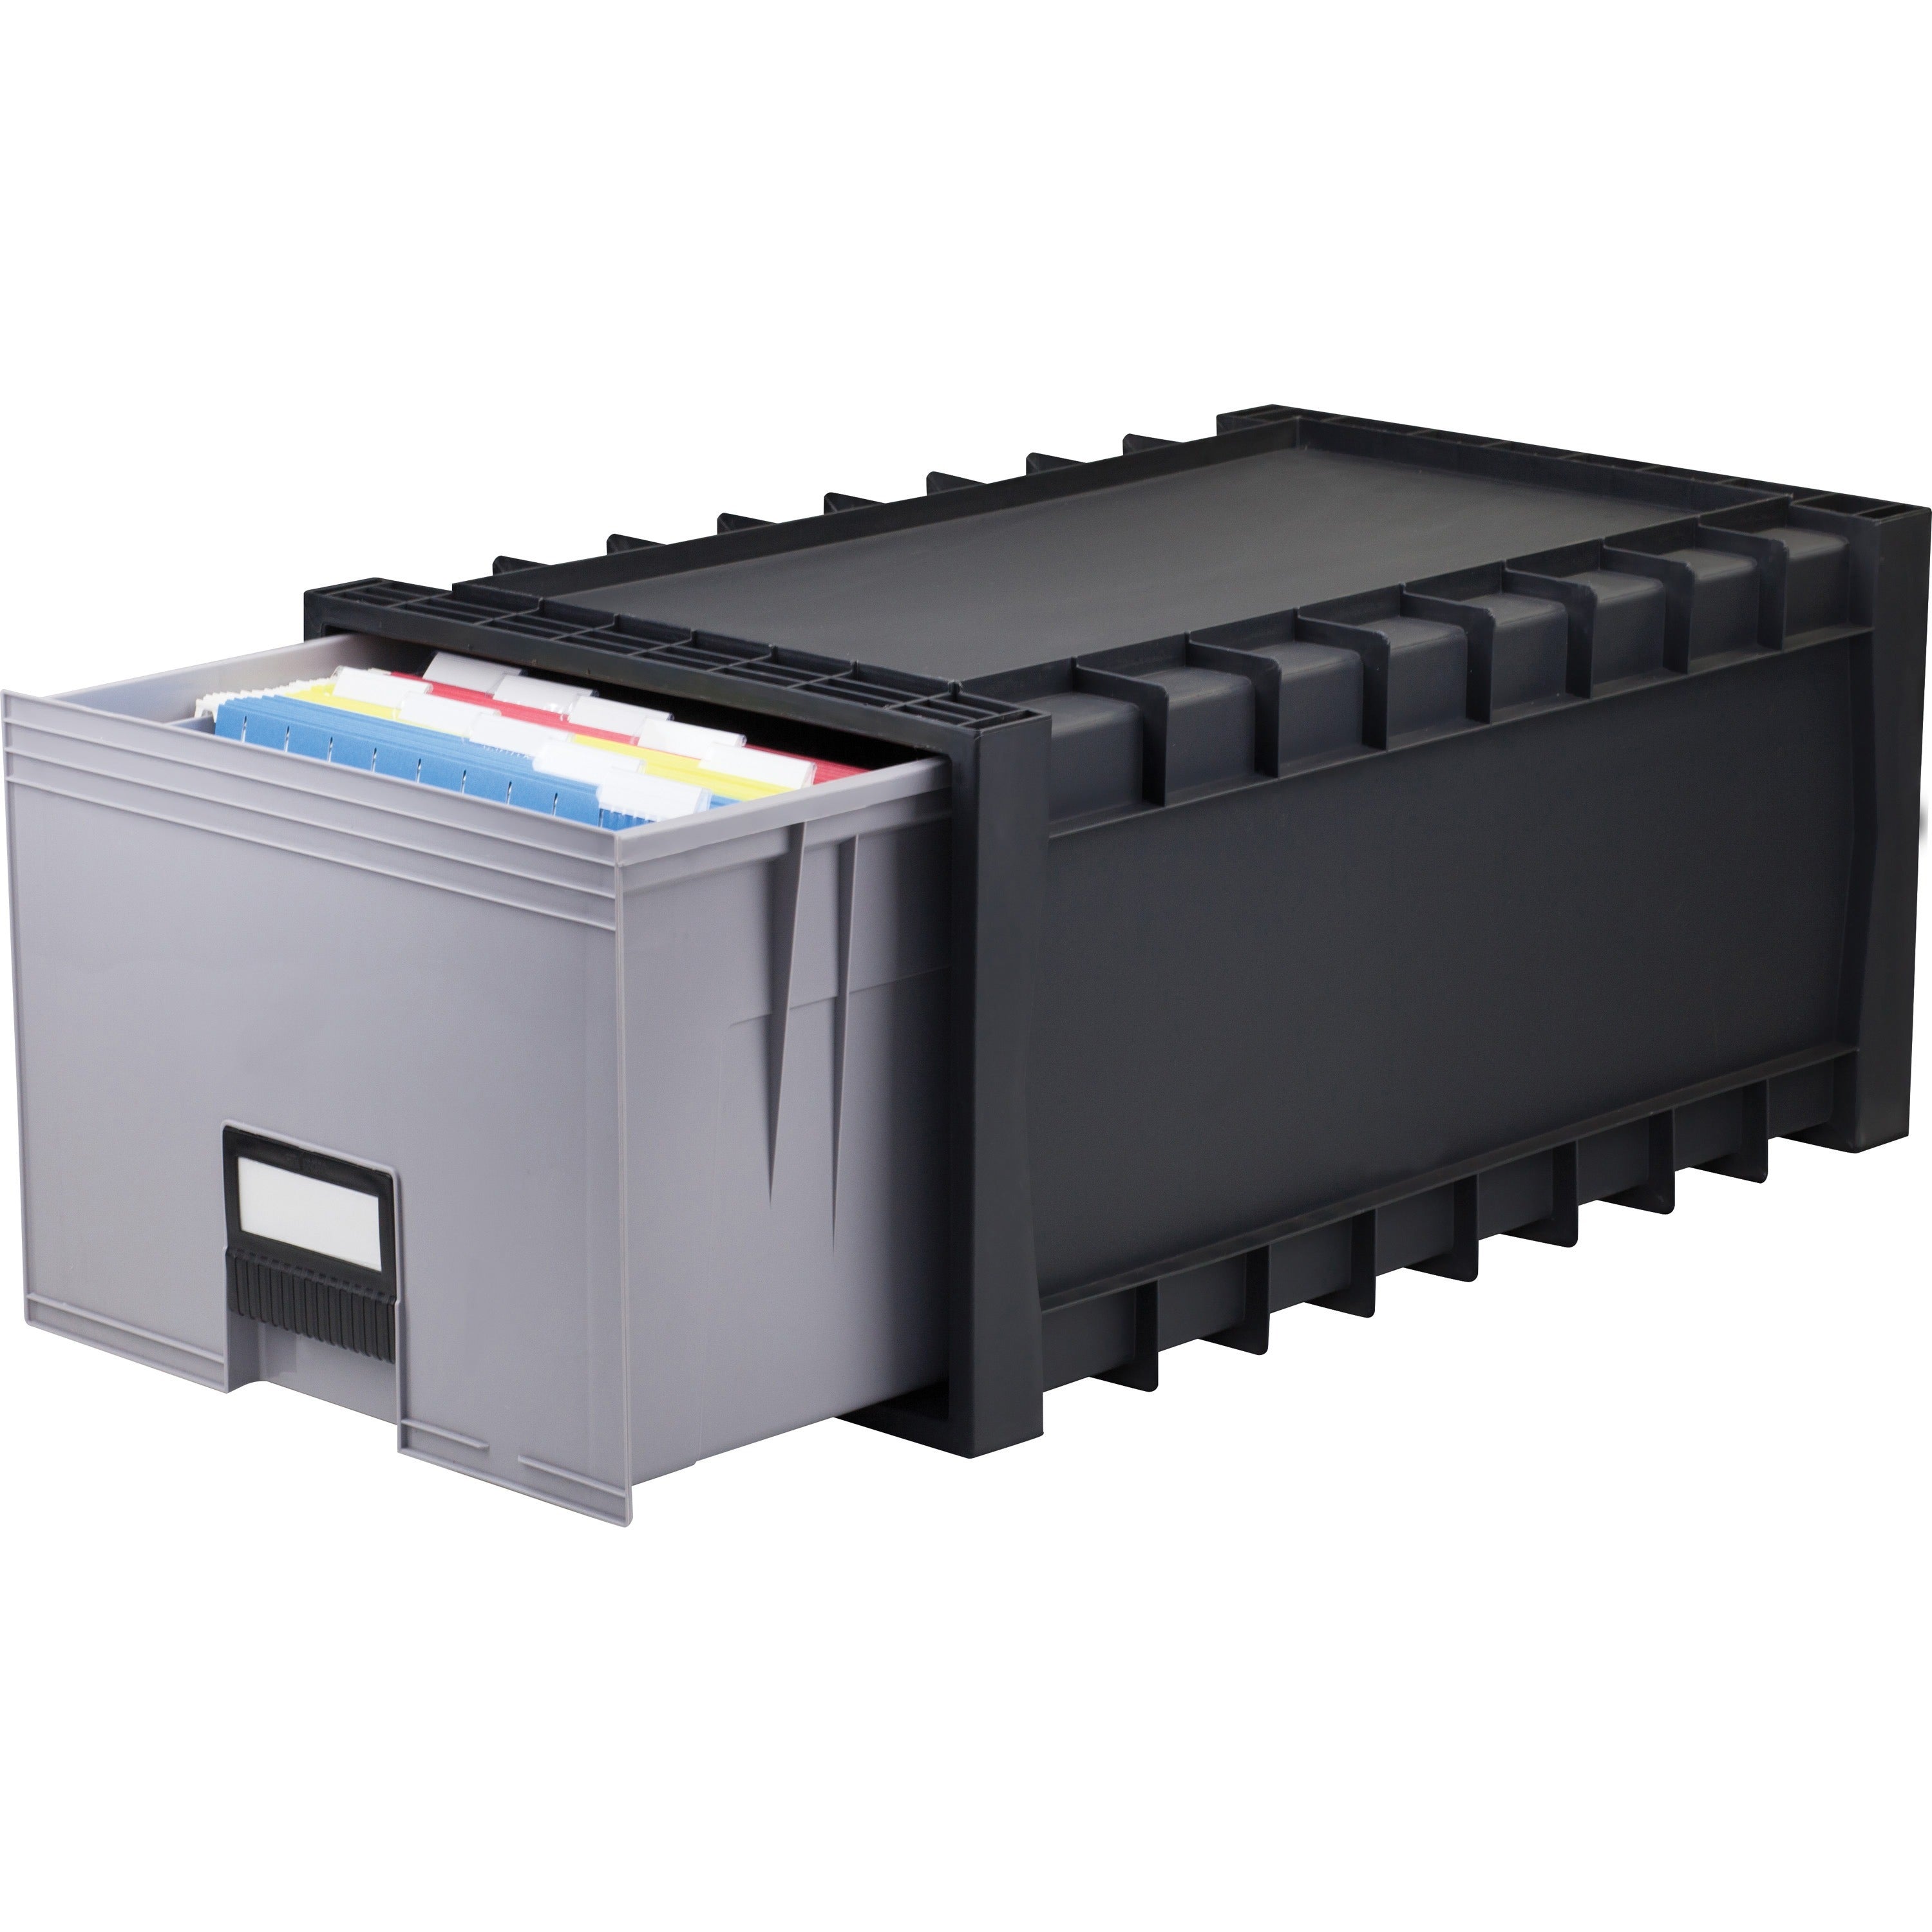 Storex Archive Files Storage Box - External Dimensions: 15.1" Width x 24.3" Depth x 11.4"Height - Media Size Supported: Letter - Heavy Duty - Stackable - Polypropylene - Black, Gray - For File - Recycled - 1 Each - 